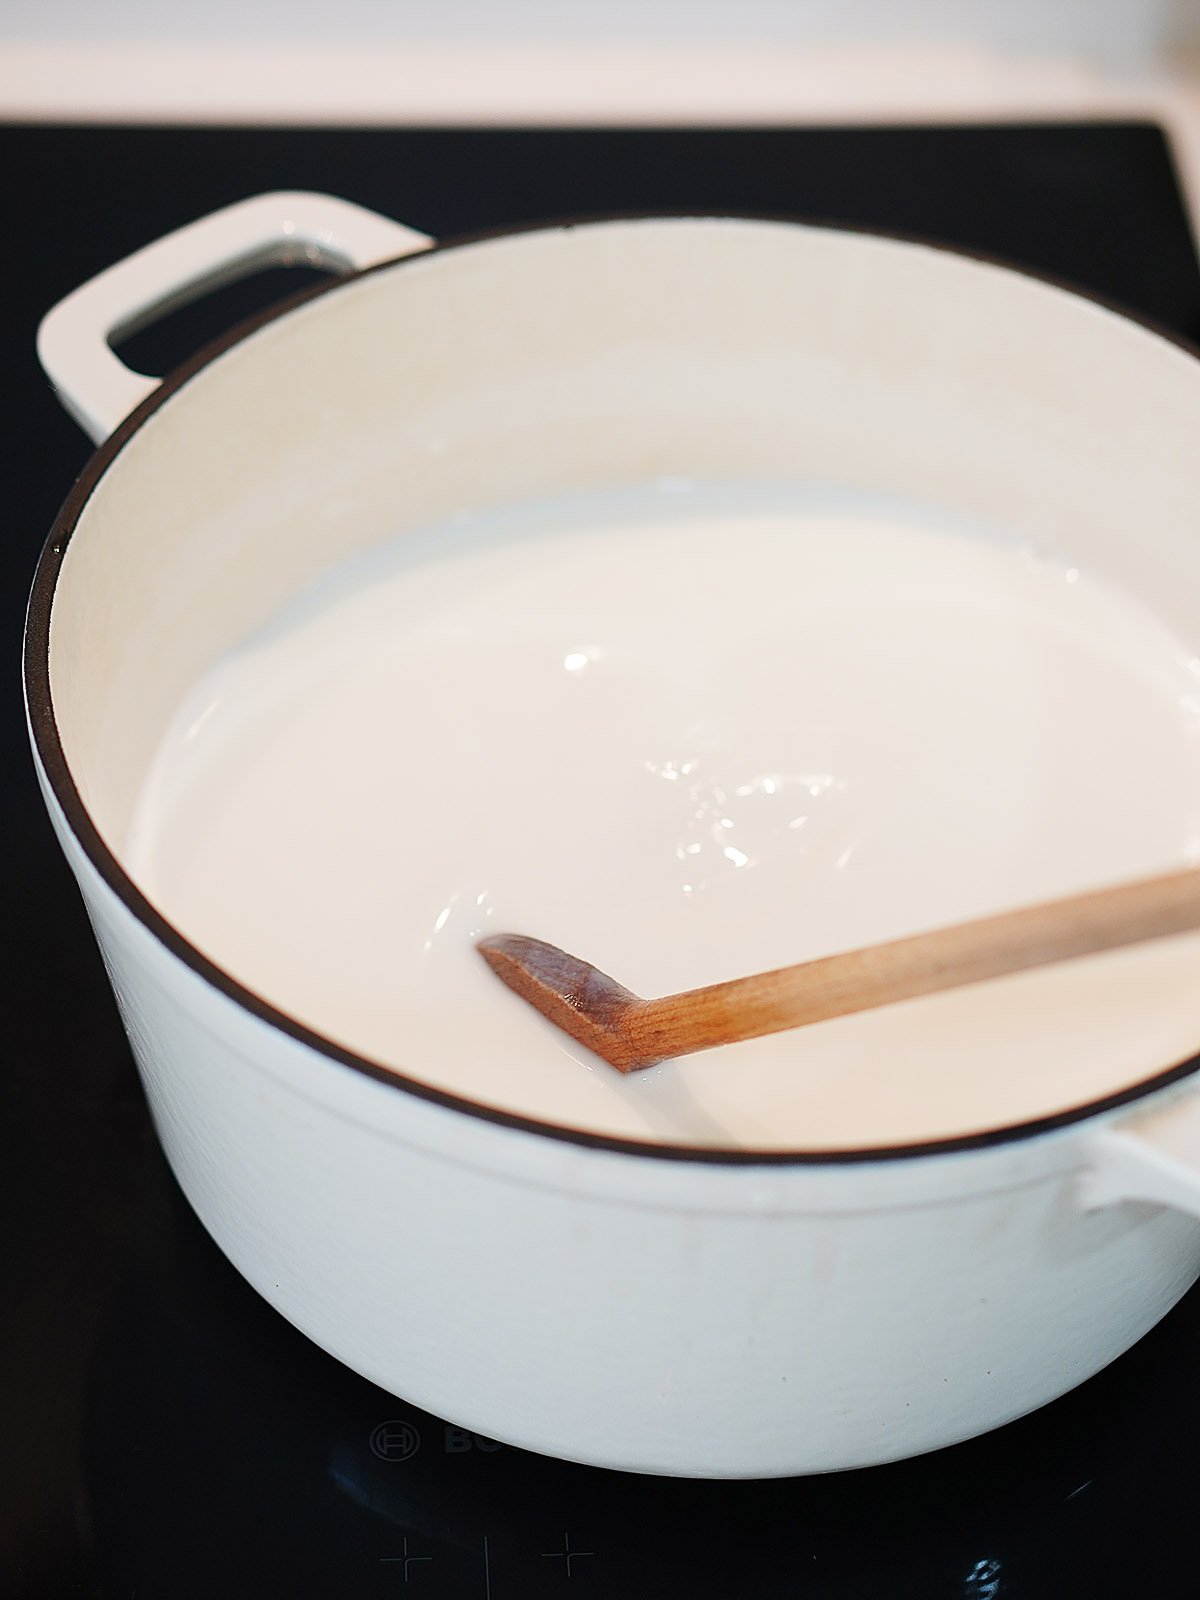 Cooking the milk in a large white sauce pot and mixing it with a wooden spoon.